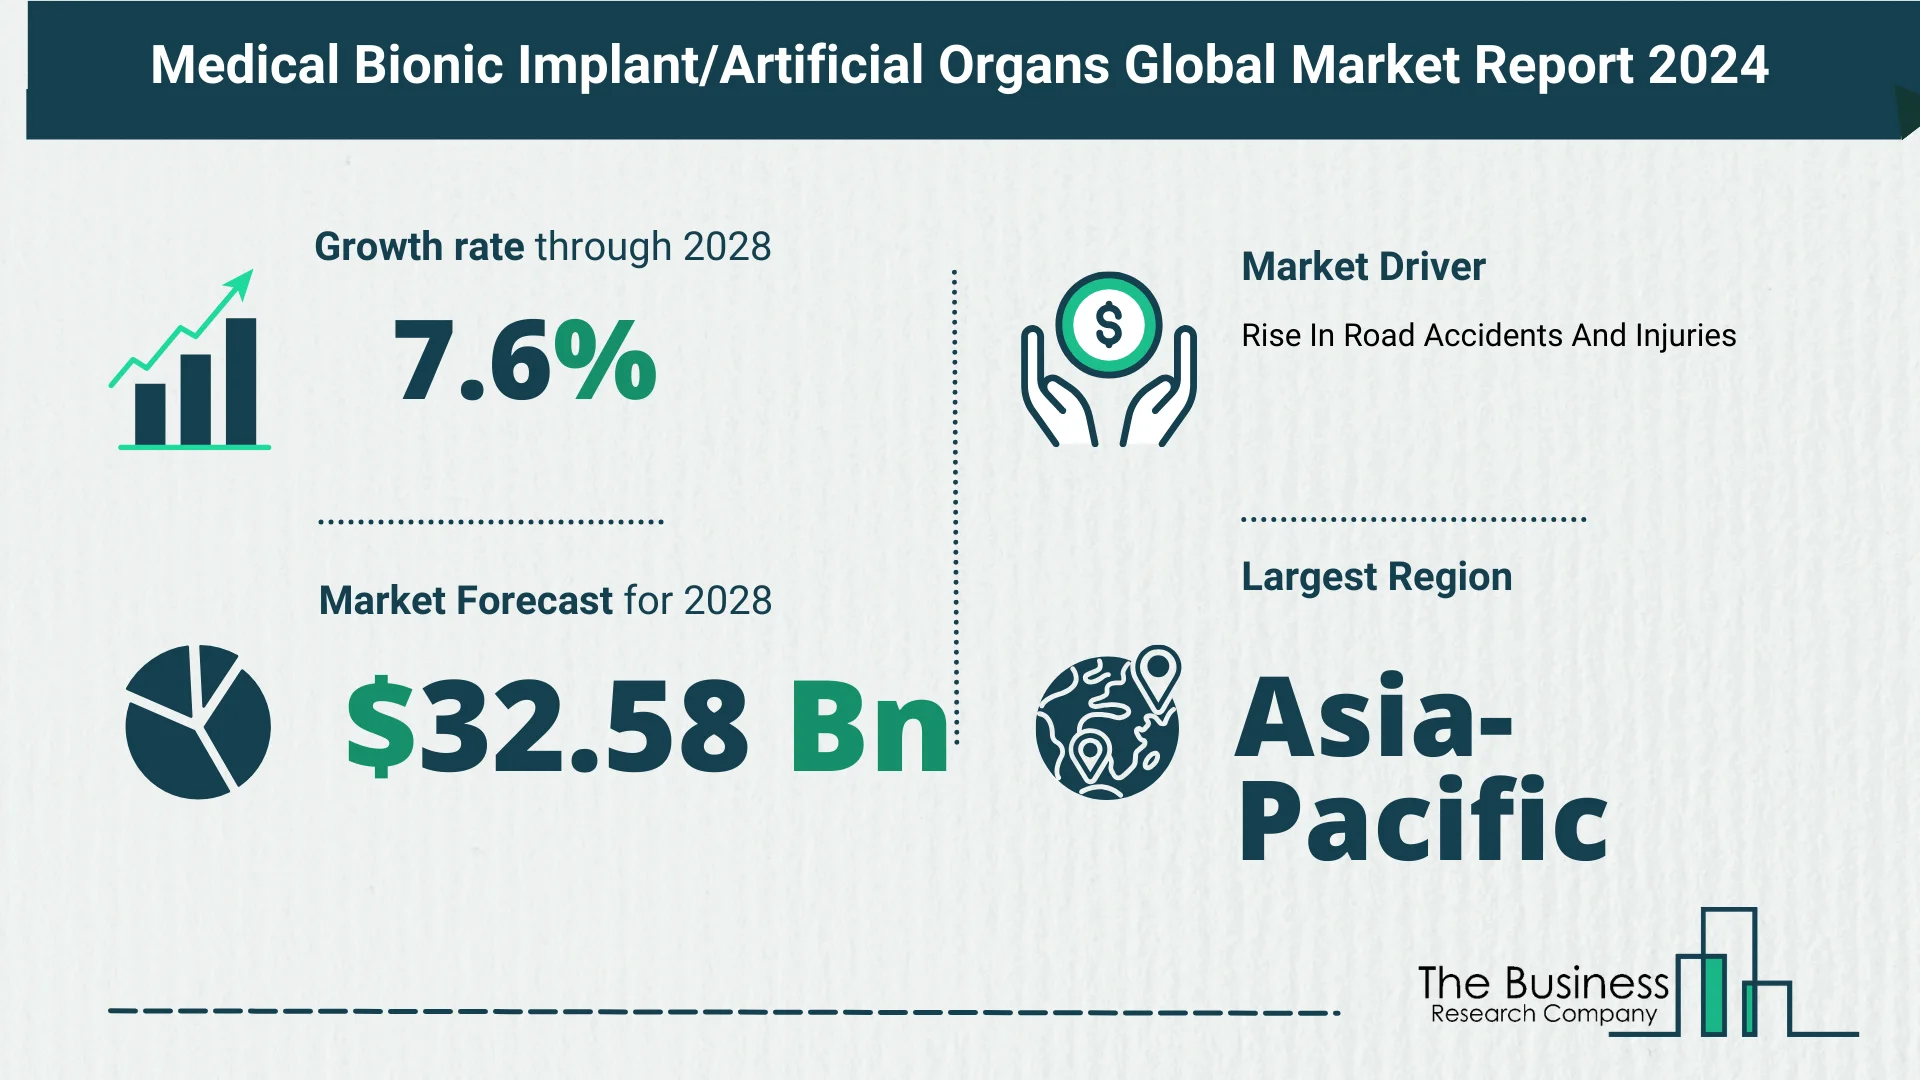 Key Insights On The Medical Bionic Implant Or Artificial Organs Market 2024 – Size, Driver, And Major Players